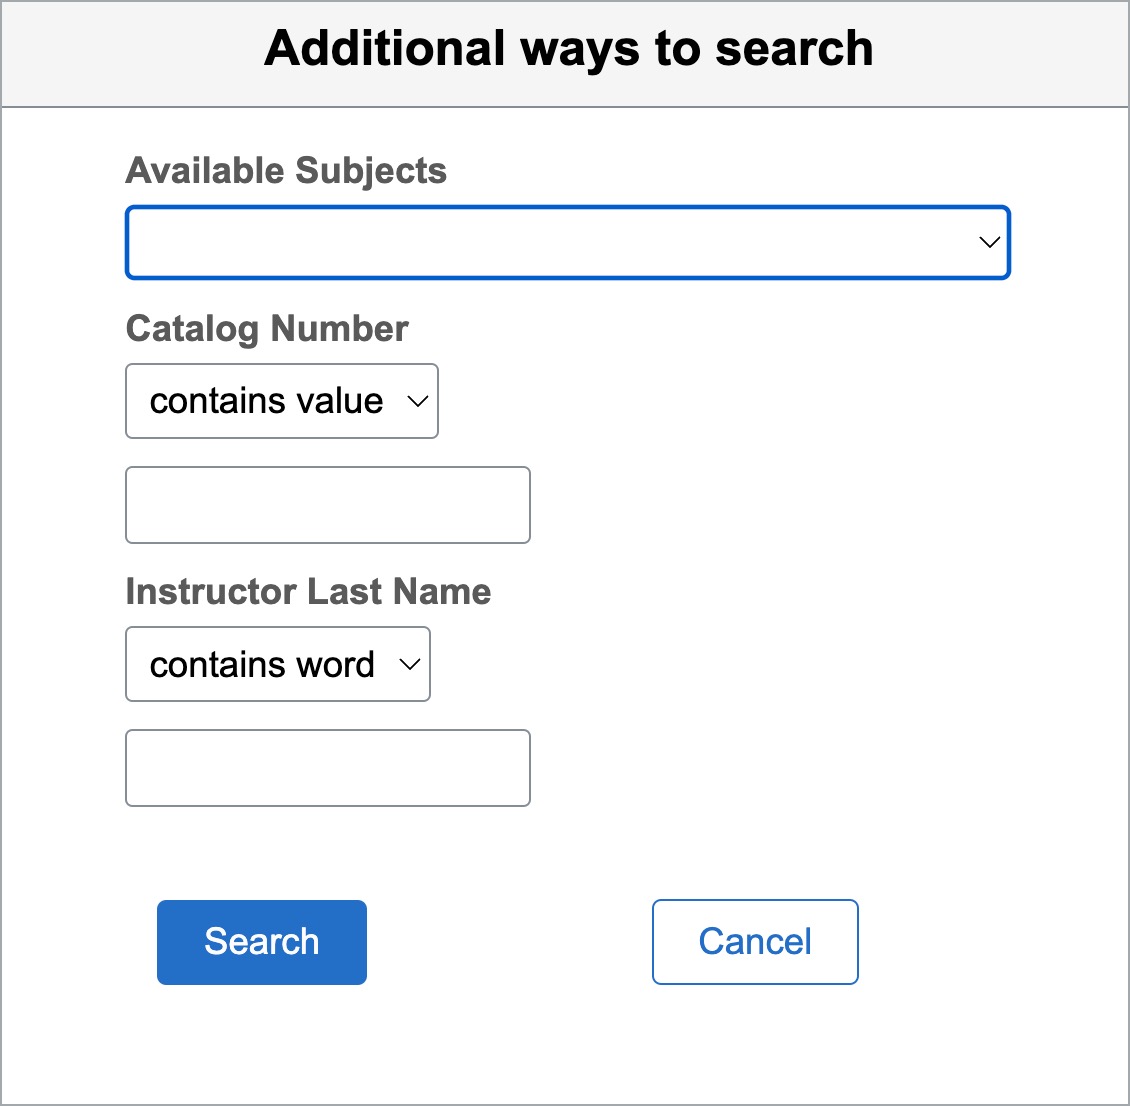 Additional ways to search screen